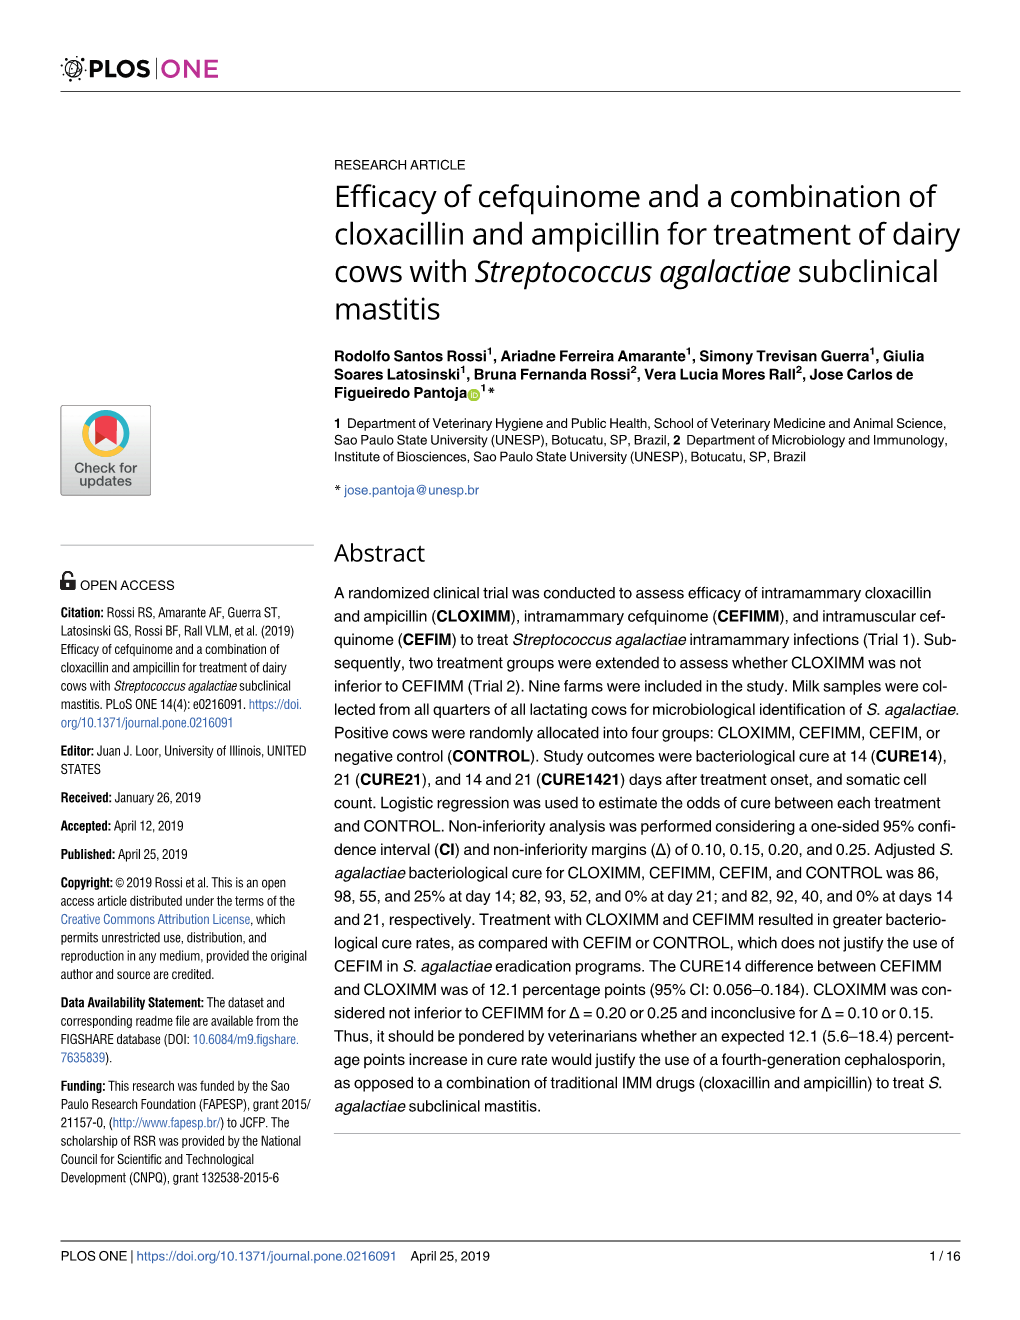 Efficacy of Cefquinome and a Combination of Cloxacillin and Ampicillin for Treatment of Dairy Cows with Streptococcus Agalactiae Subclinical Mastitis